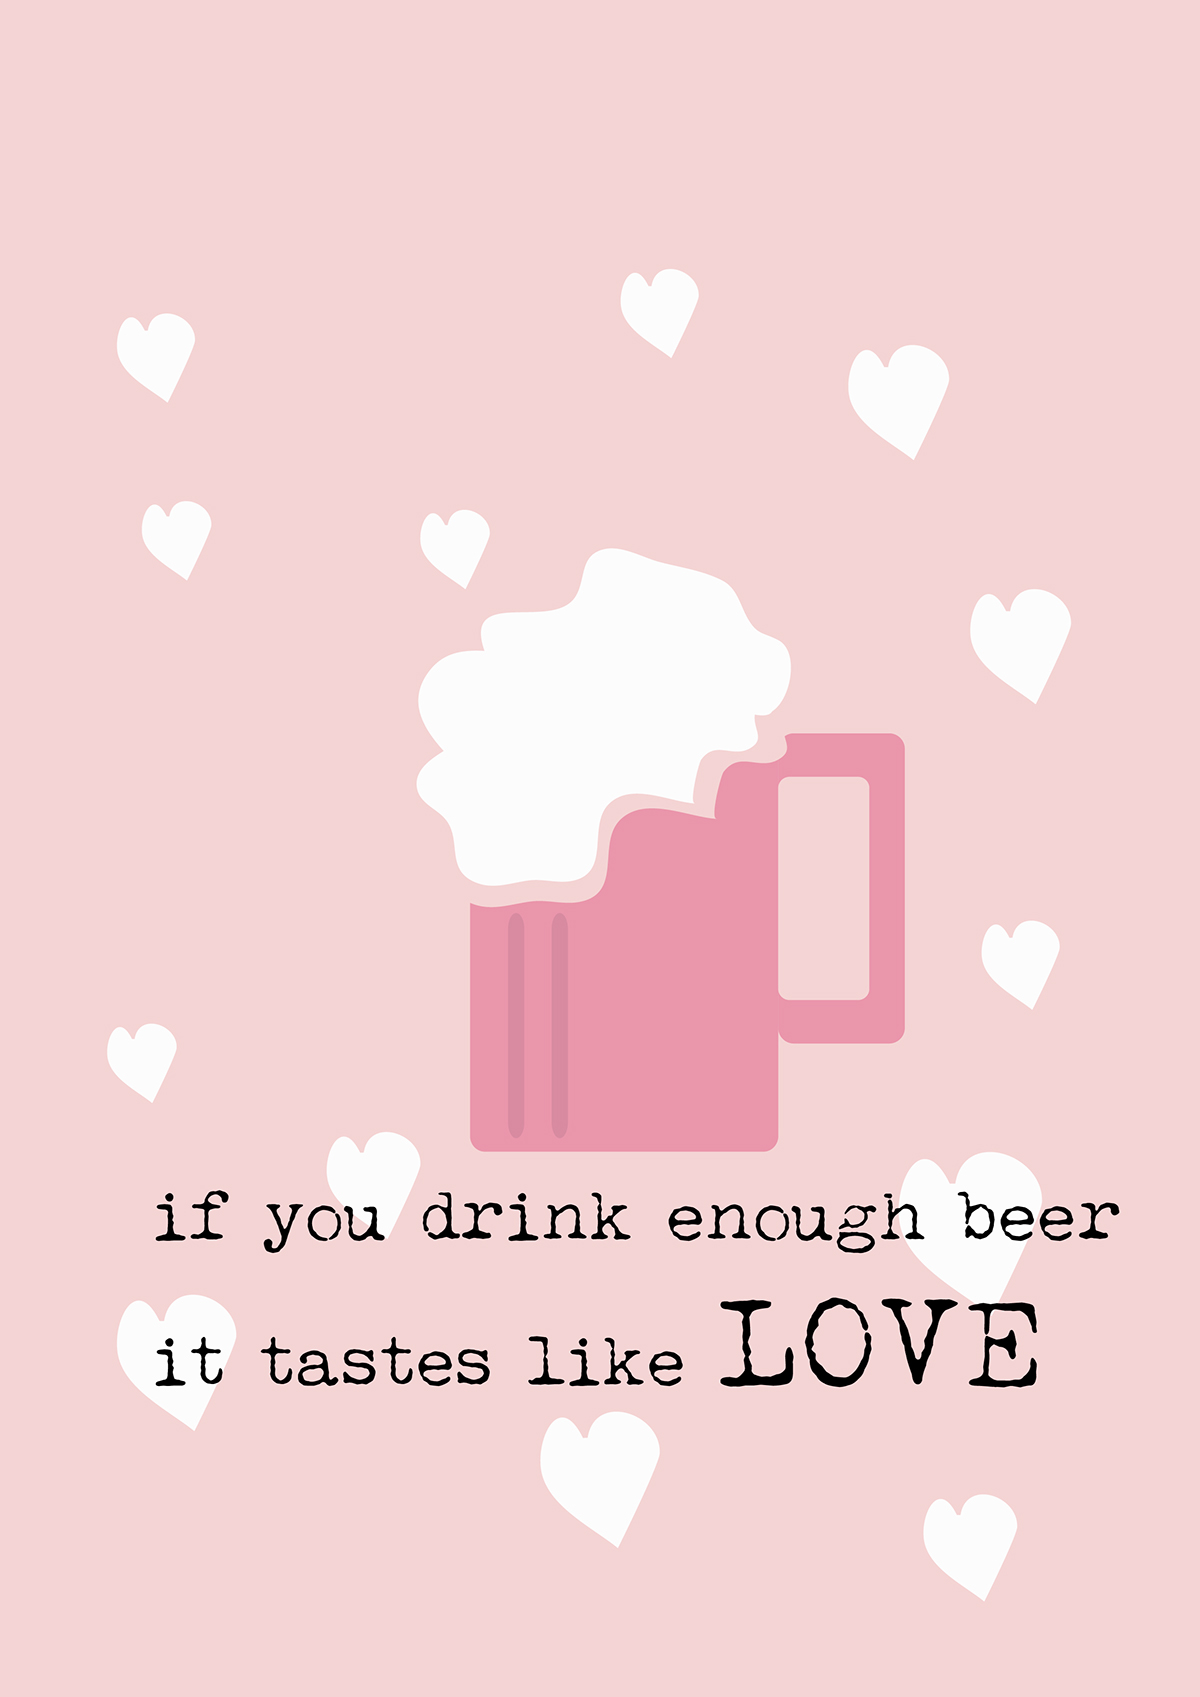 beer Love sweet Cheese cake colorful cheerful yum pink quirky funny